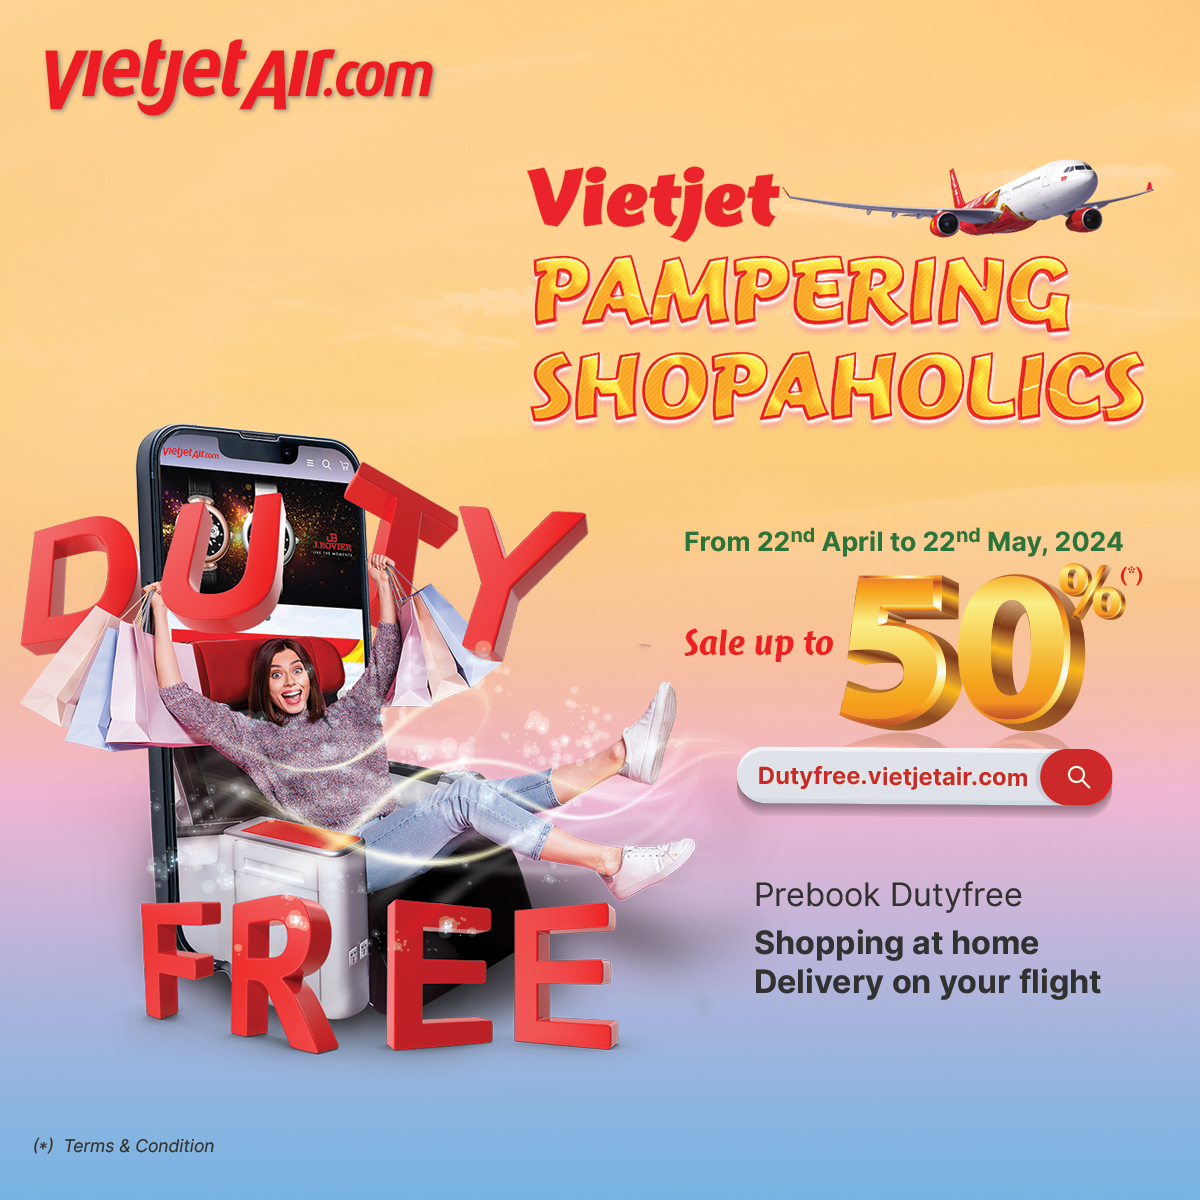 Hot News! Shop Tax Free with a 50% discount at Vietjet's online store and receive items on international flights, with 2 steps. 📝 Fill out the form and Receive the discount code via email. 🛒 Shop now at dutyfreevietjet.com More information in description #Vietjet #DutyFree